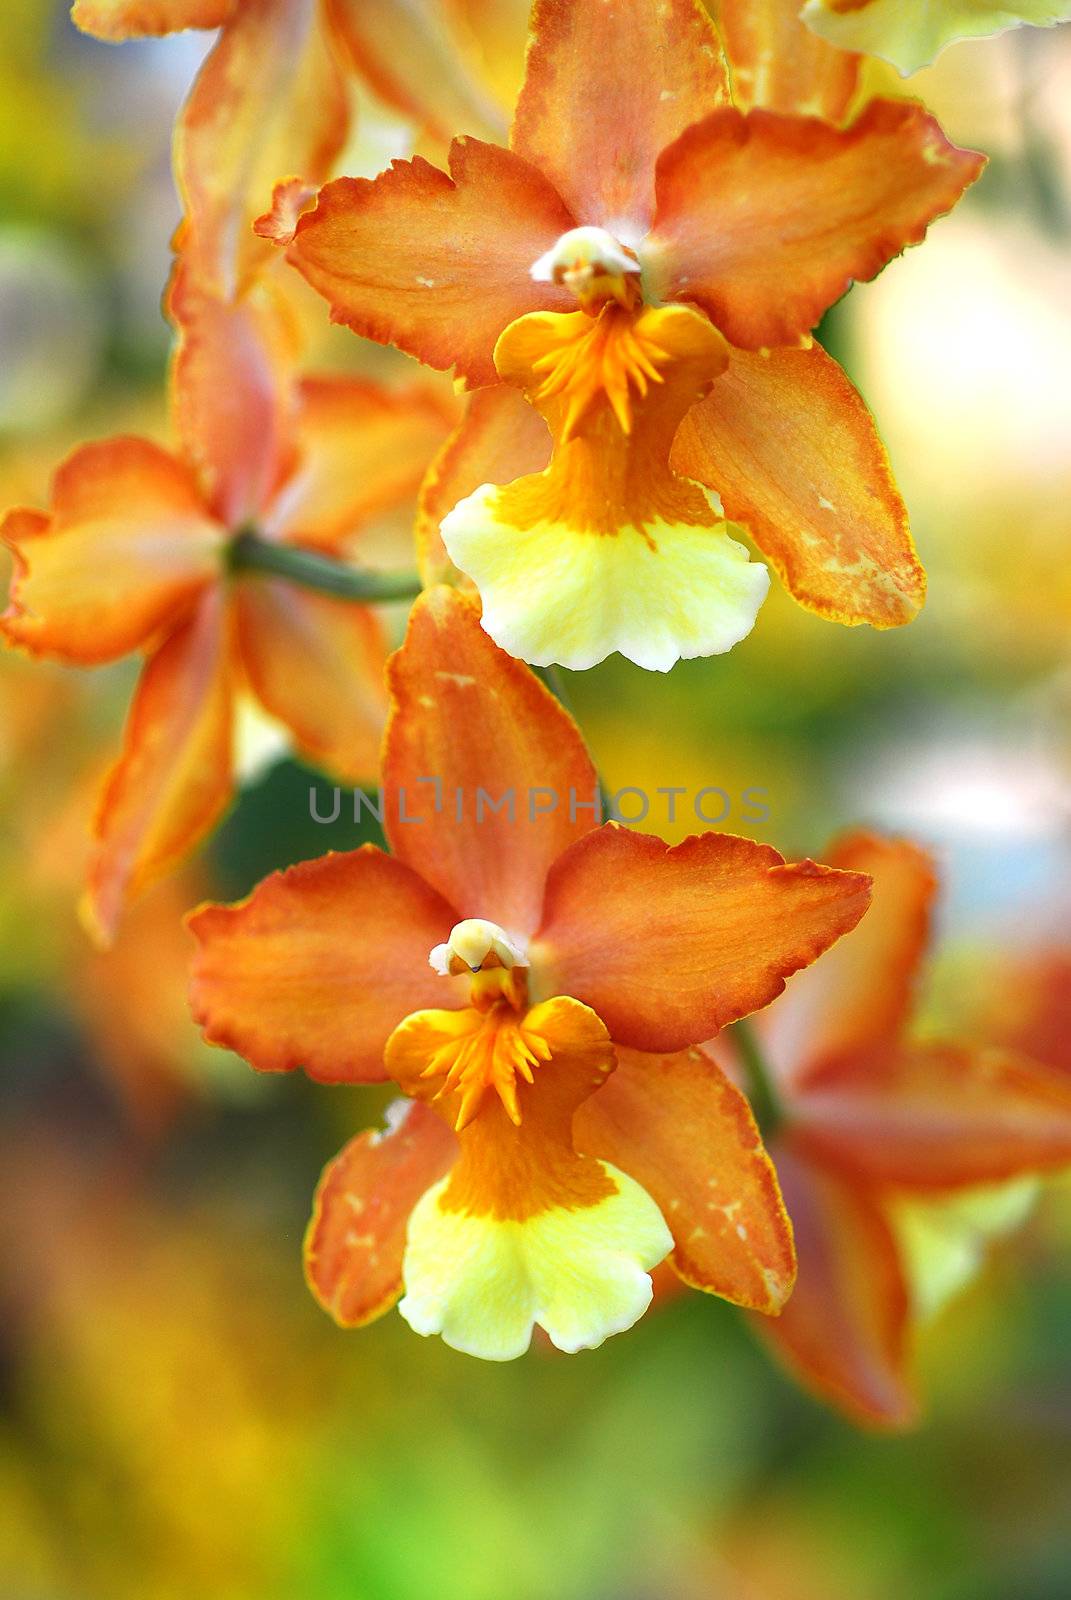 Oncidium Yellow brown Orchid flower by nikonite